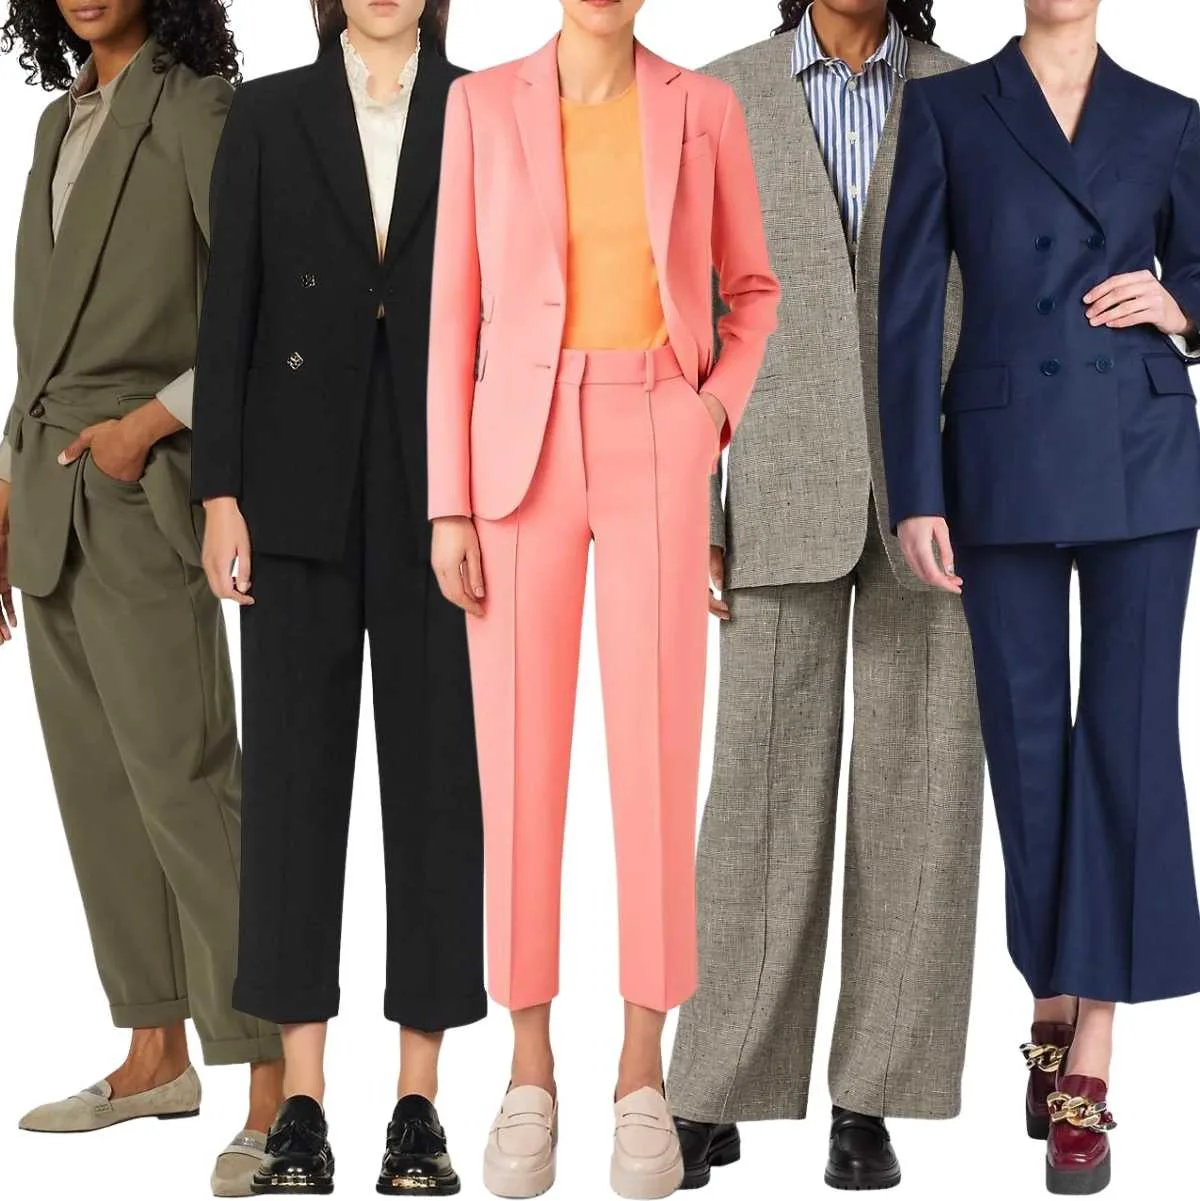 Collage of 5 women wearing loafers with pantsuits.